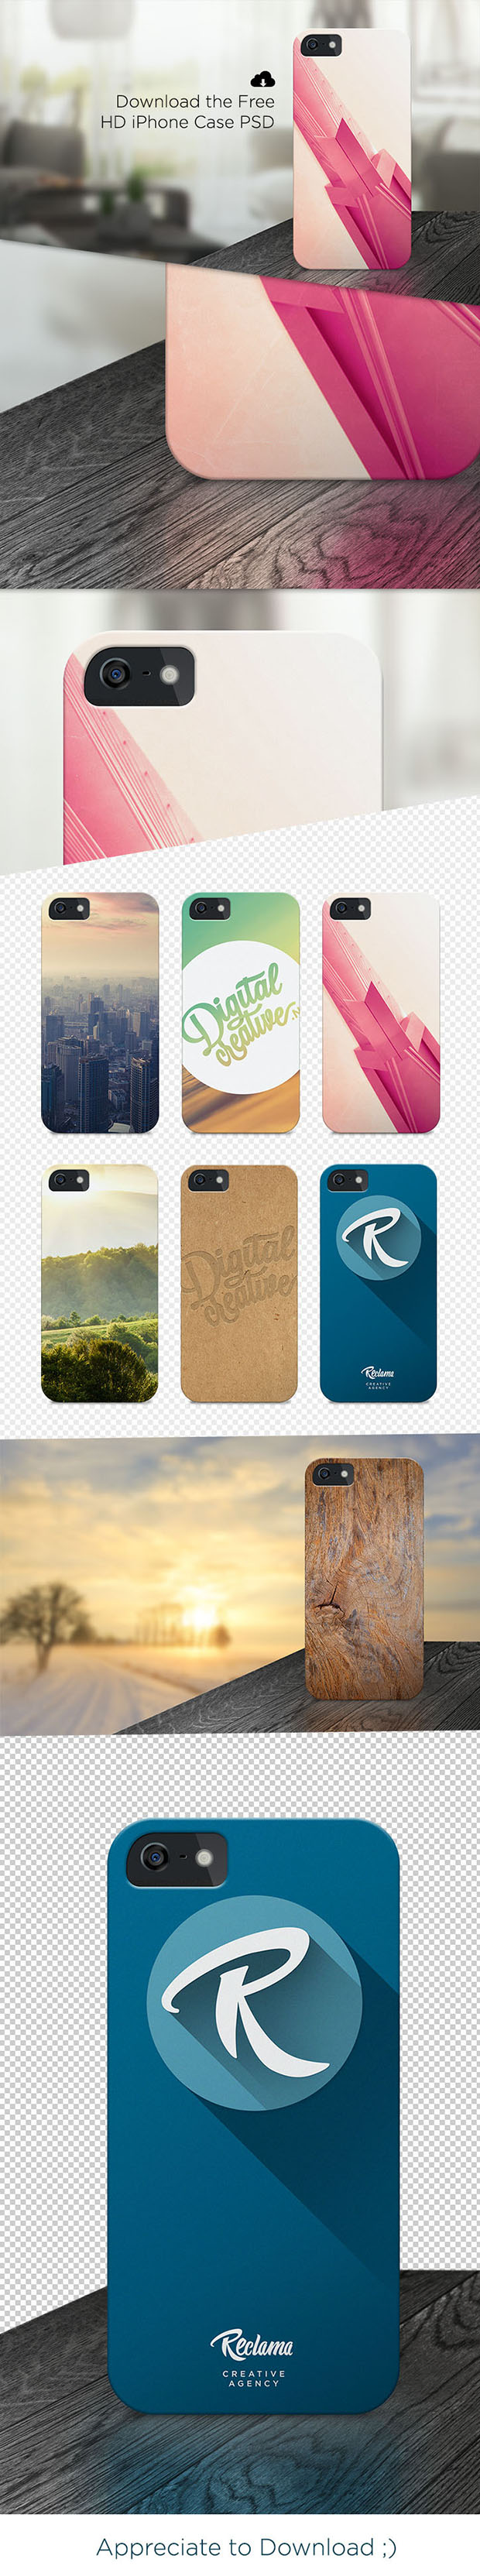 Free-iPhone-Case-PSD